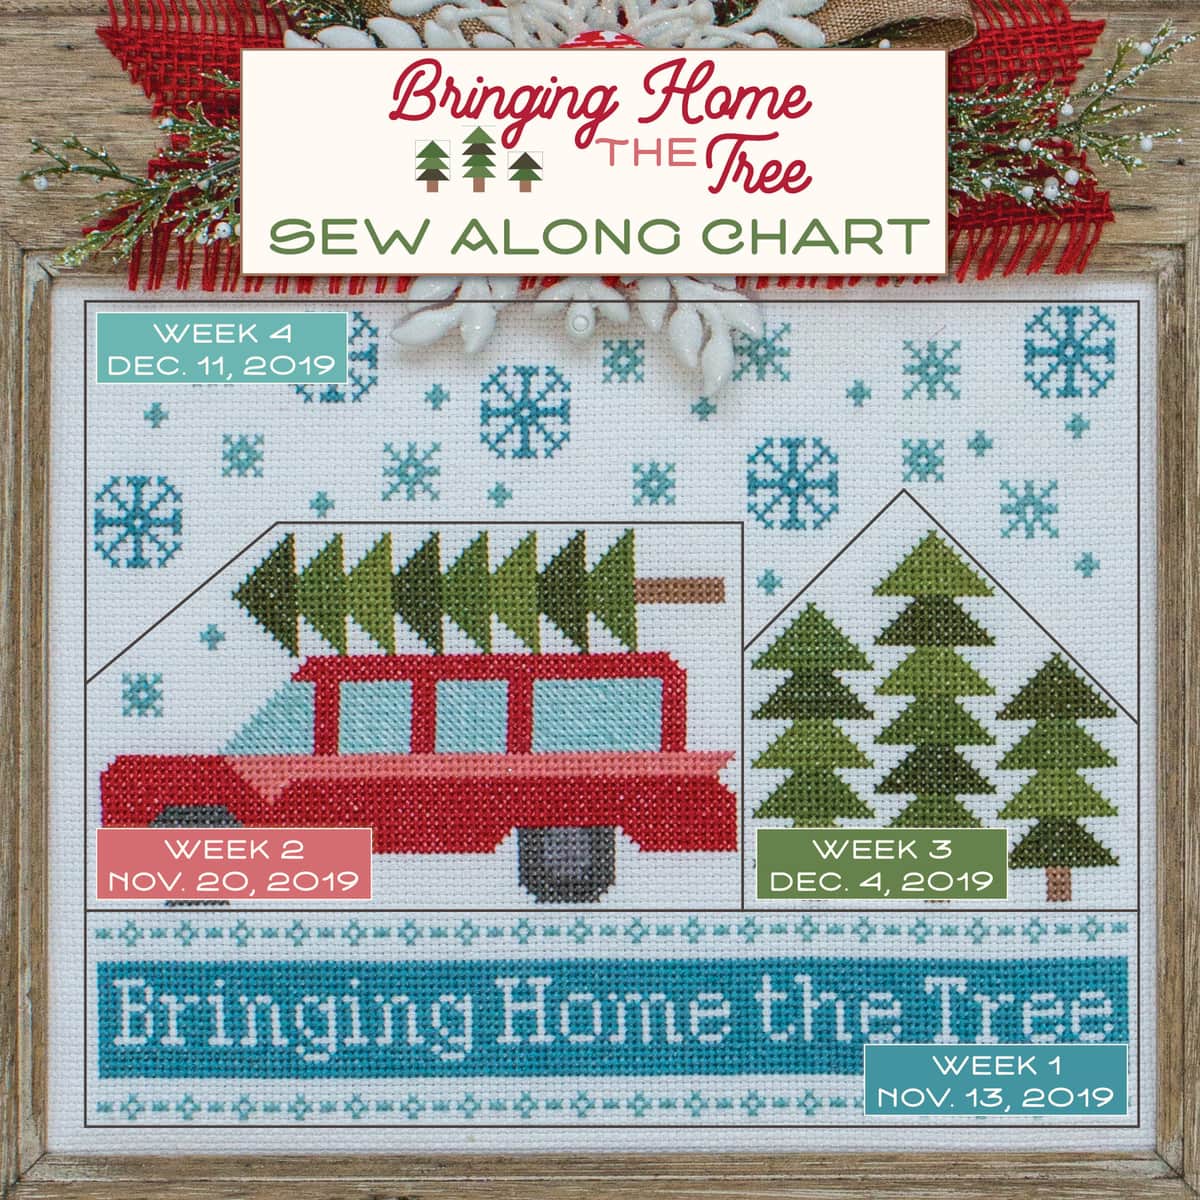 The Bringing Home The Tree Cross Stitch Pattern is separated into four separate sections